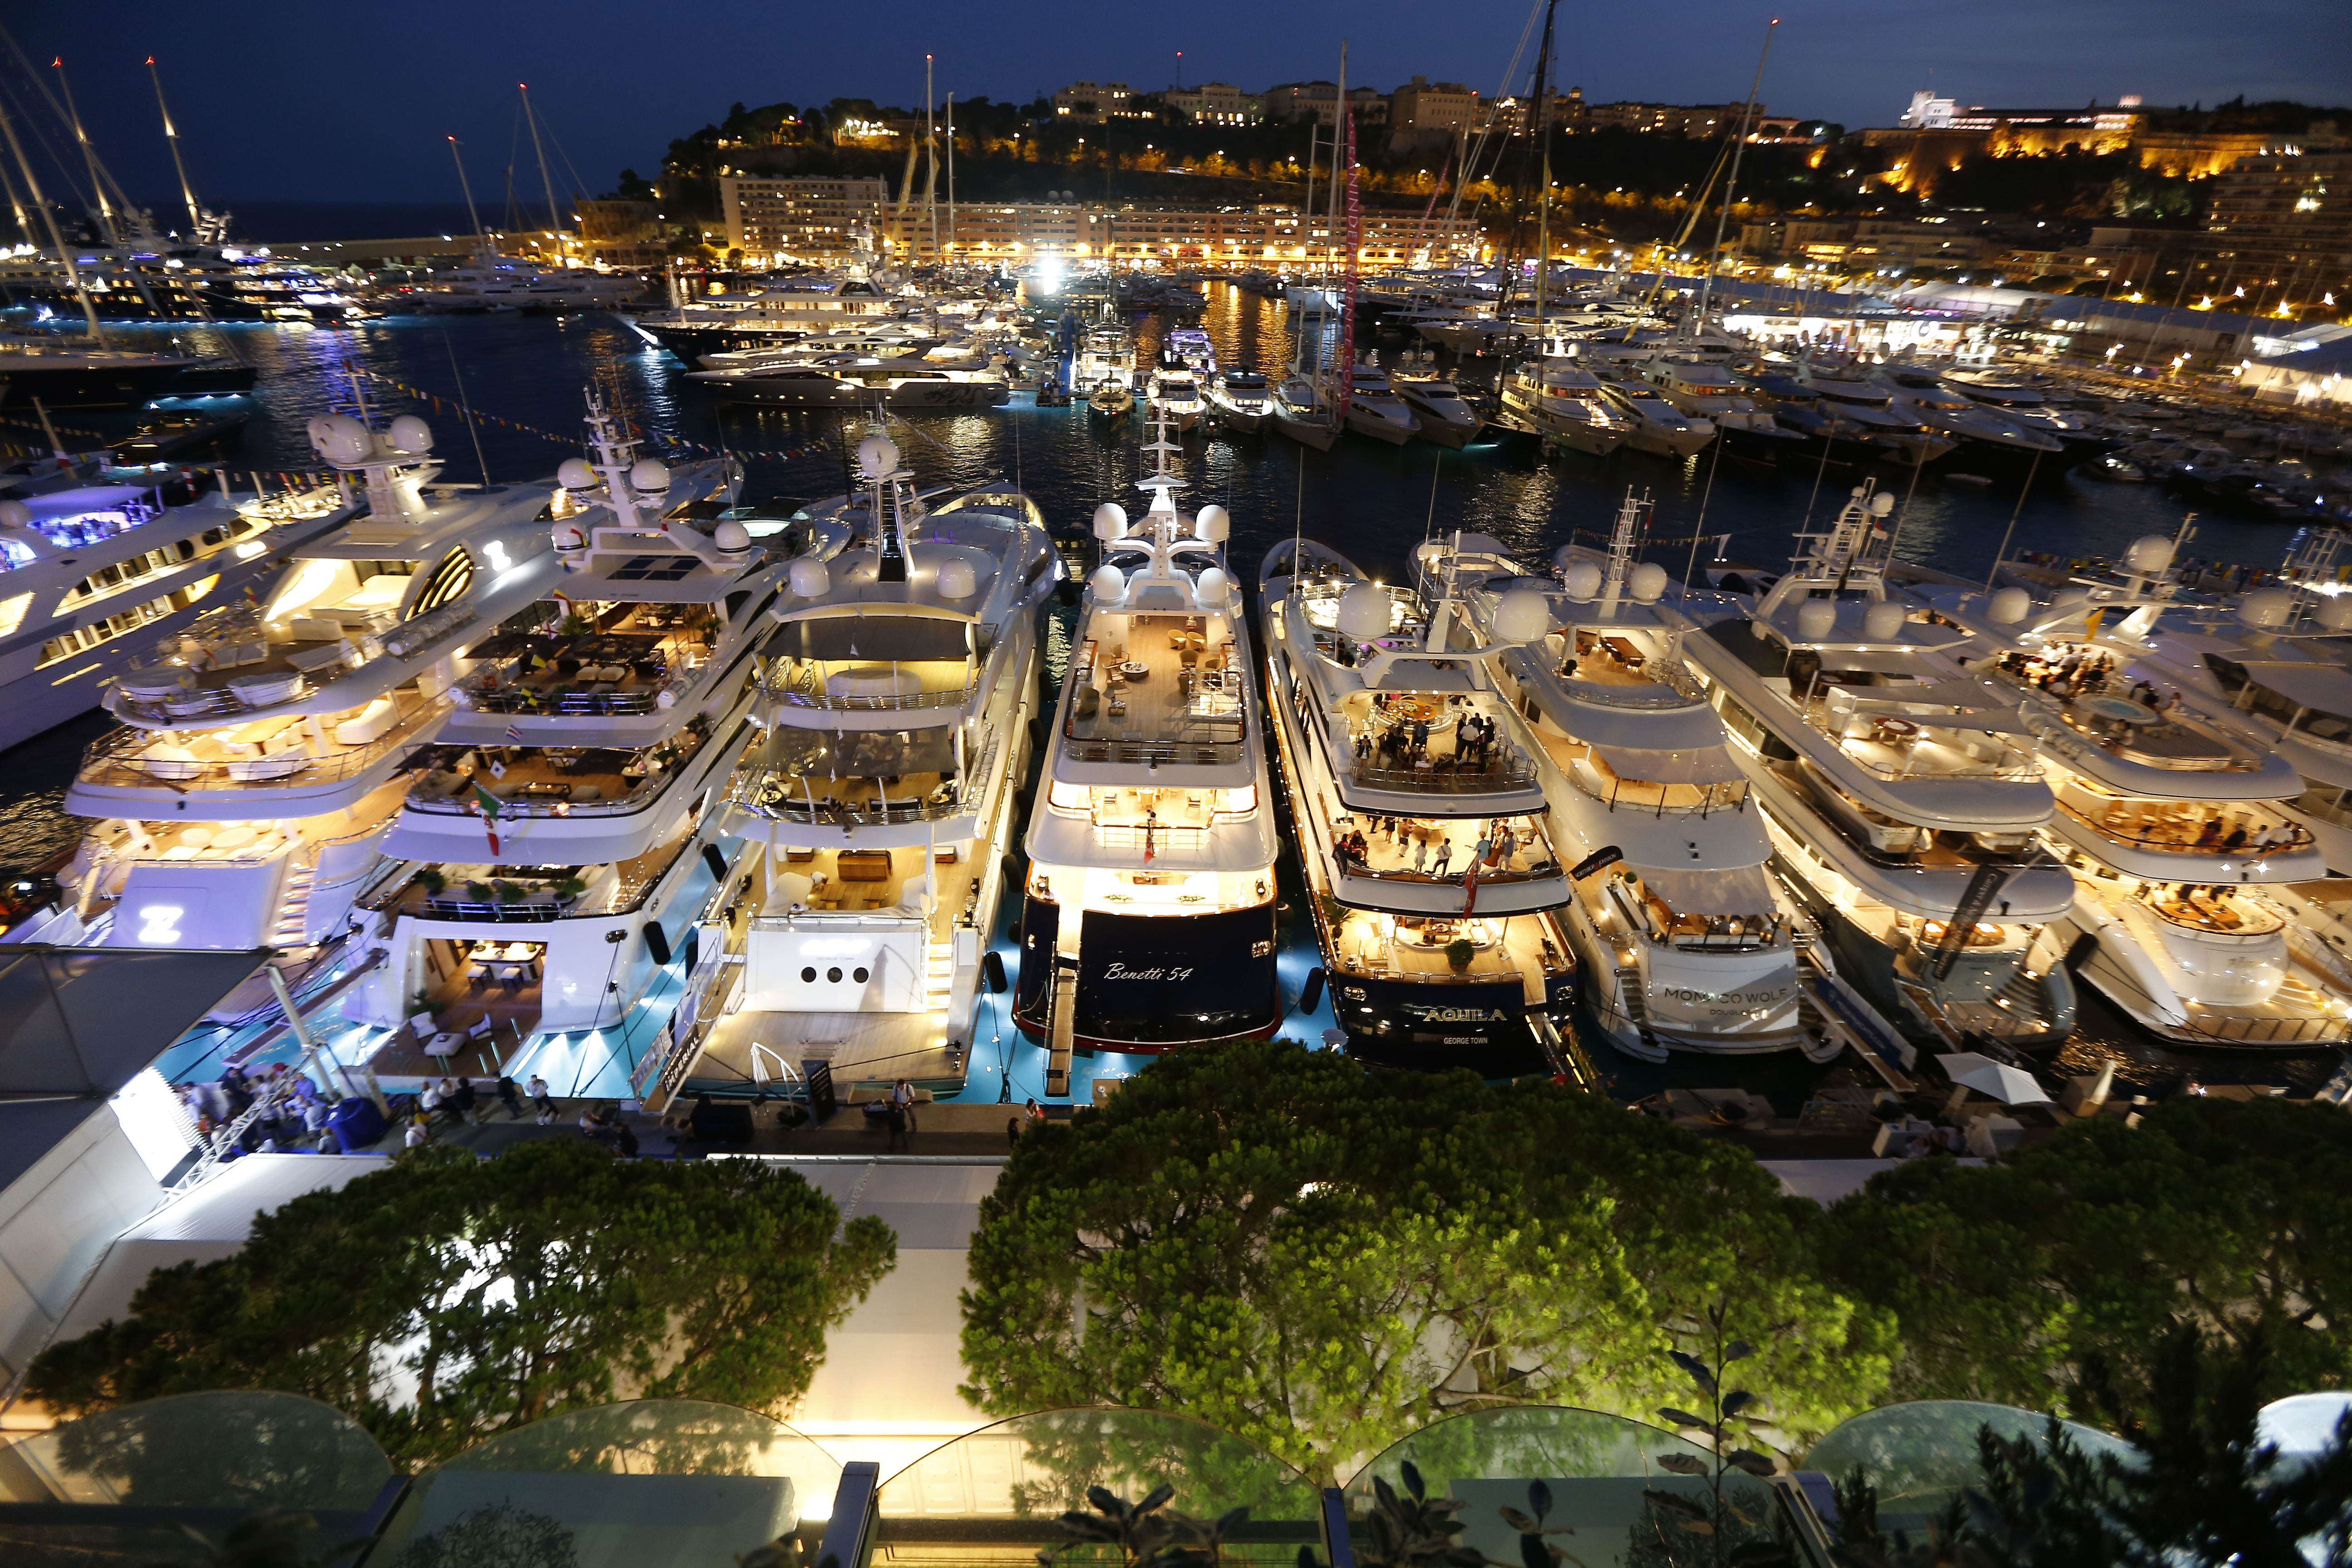 Luxury yachts pictured at The Monaco Yacht Show. Such symbols of economic success are celebrated in the US, whereas Beijing has cracked down on extravagant displays of wealth. Photo: AFP